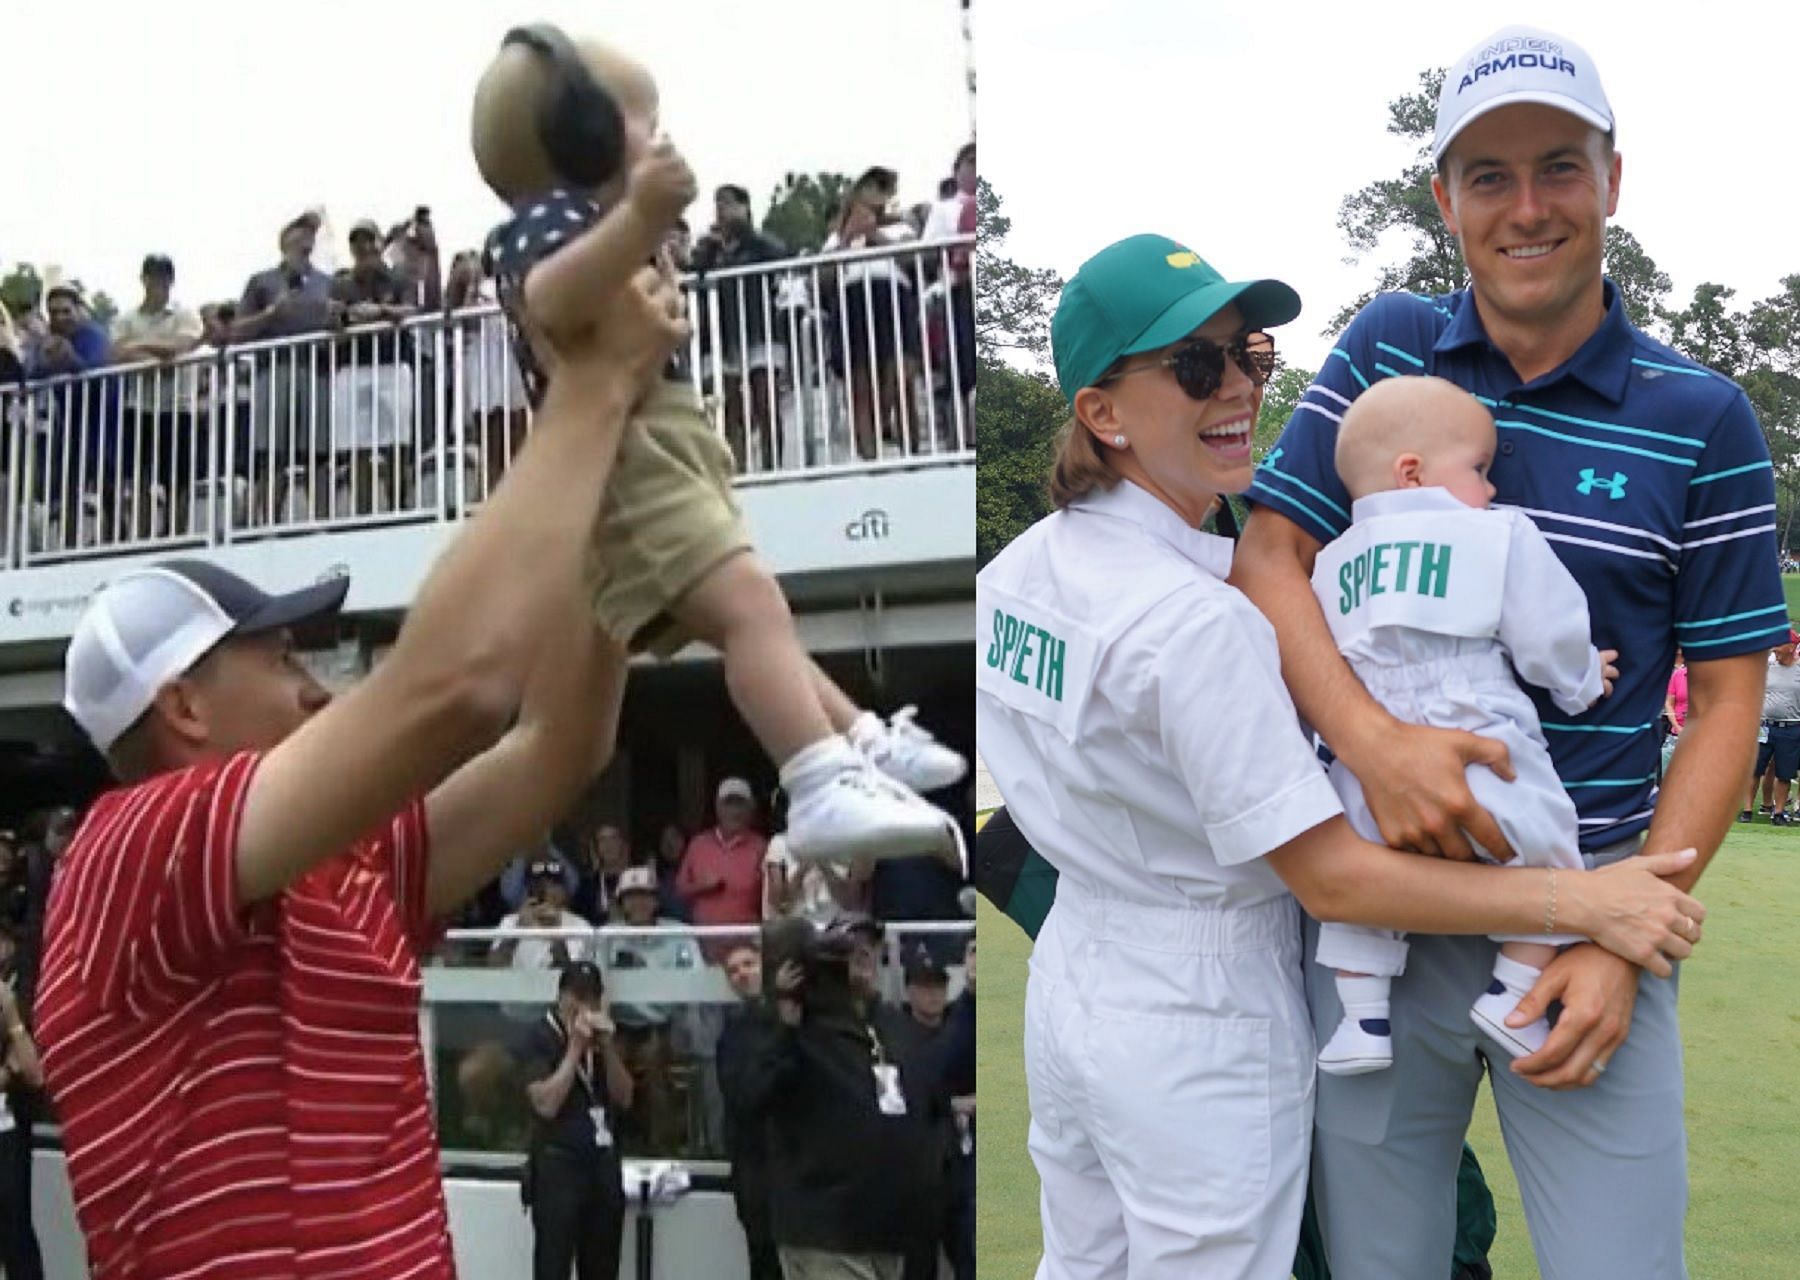 Fans react to Jordan Spieth mimicking 'Lion King' pose with his son Sammy